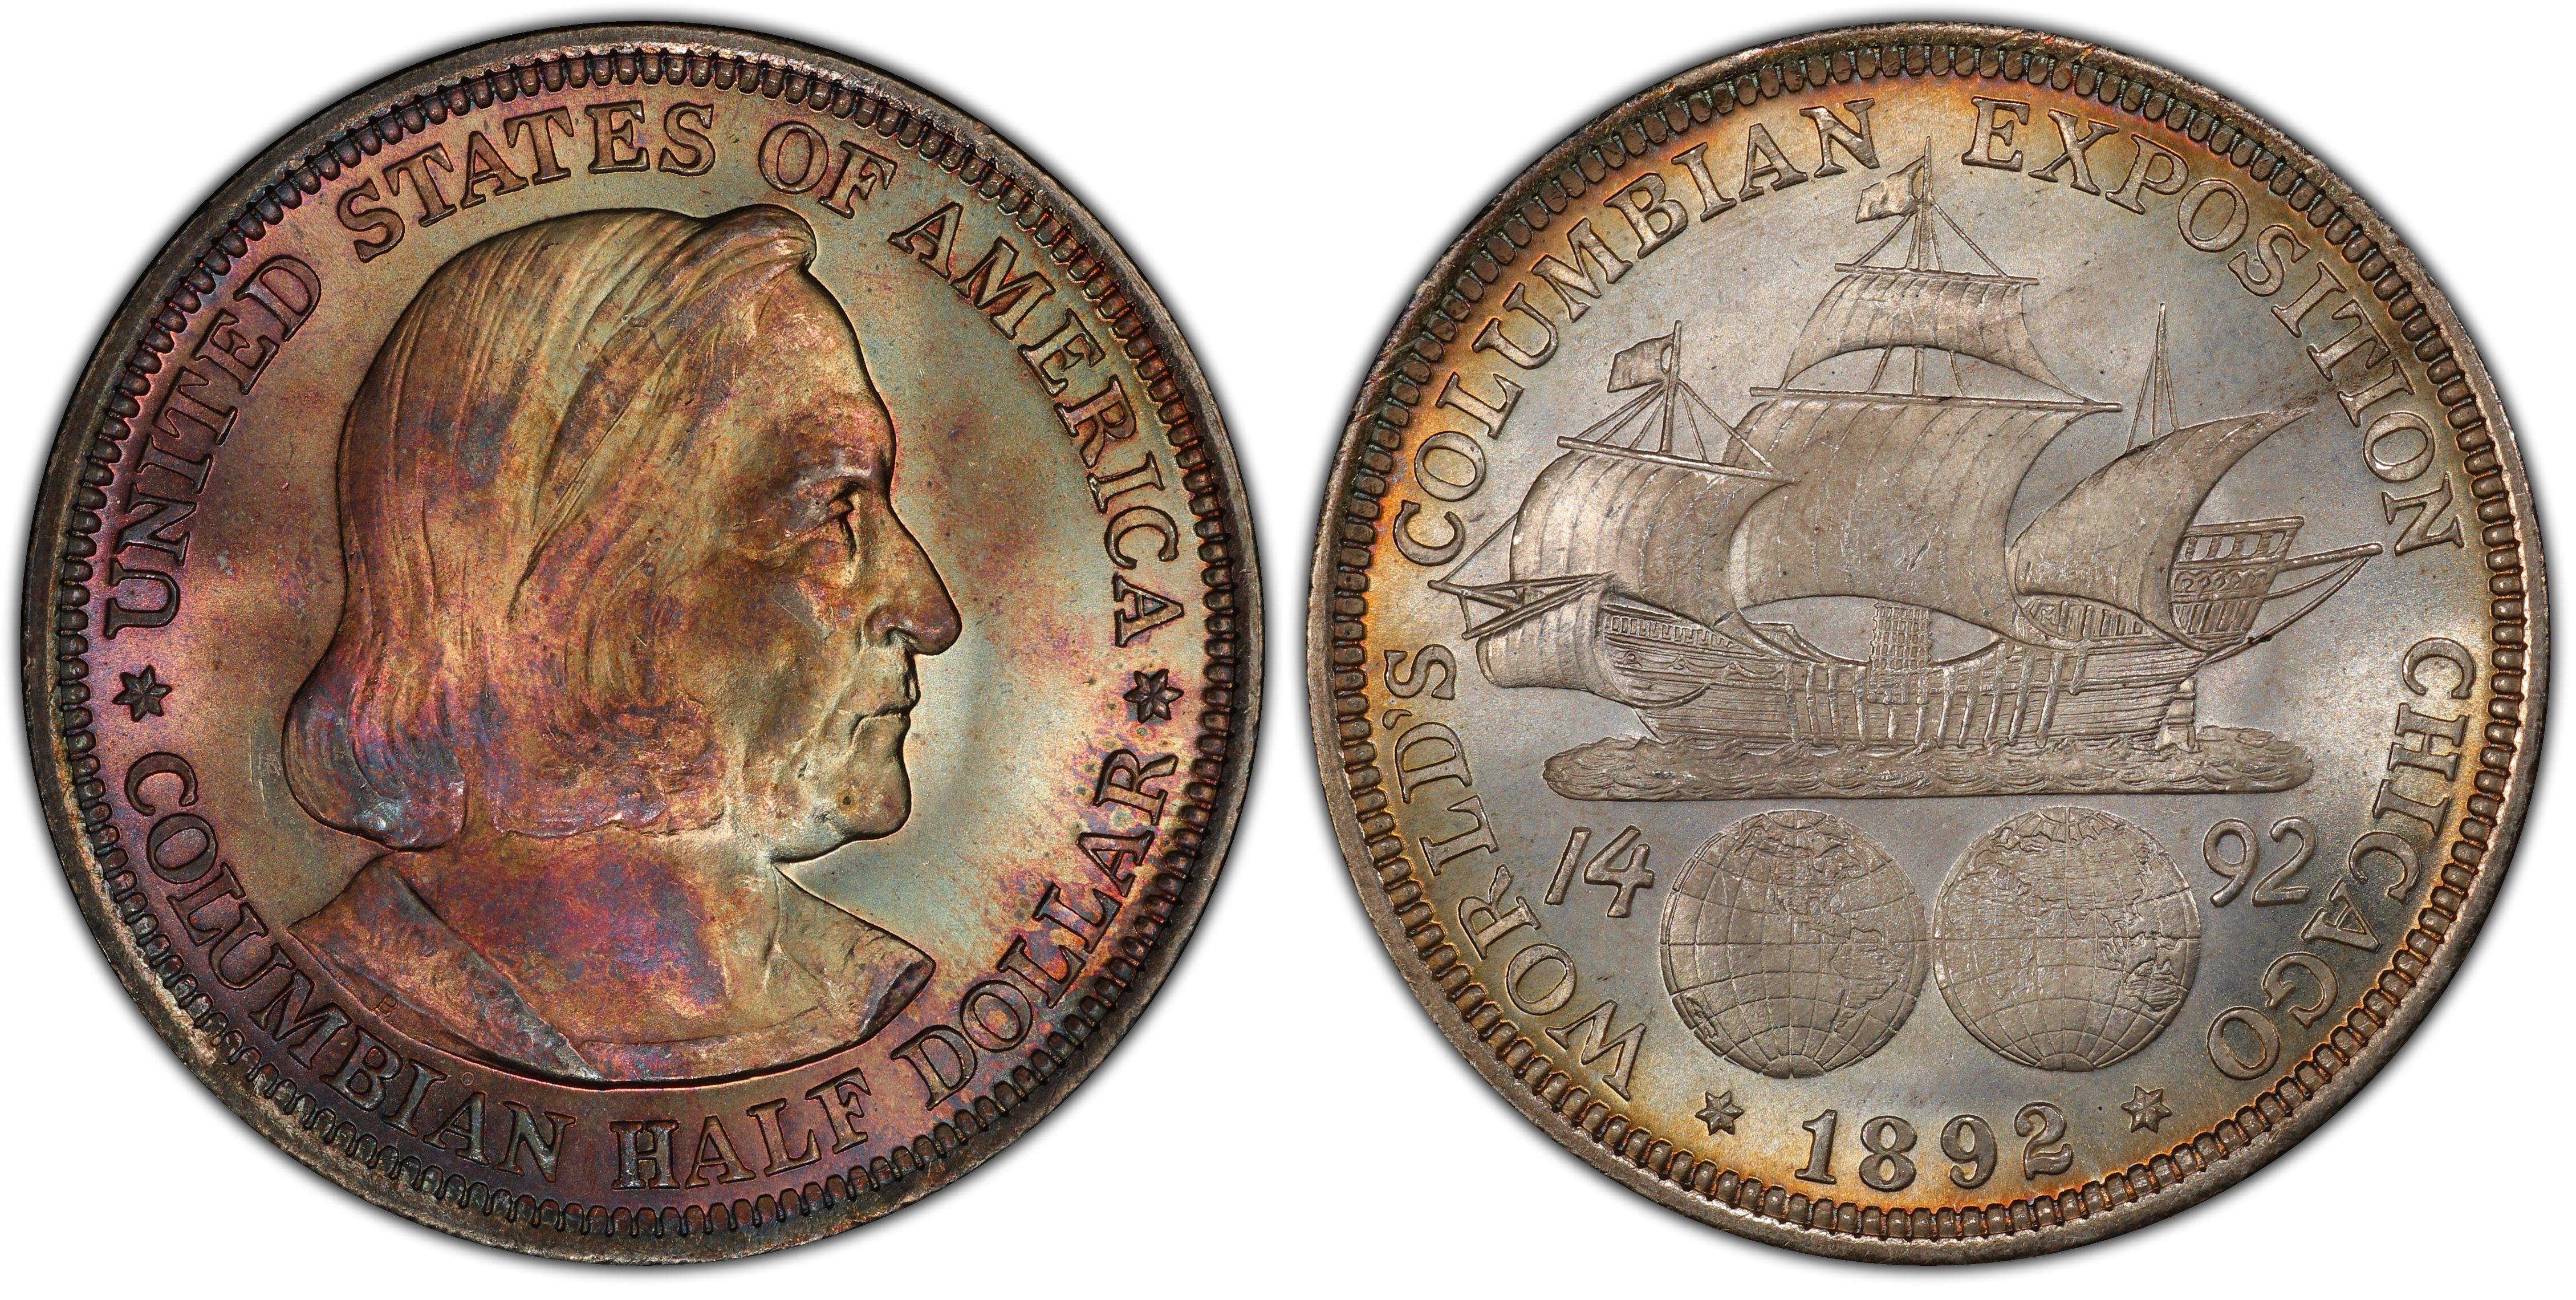 Sizes 7-13 Replica 1892 Worlds Colombian Exposition Commemorative Half Dollar Co